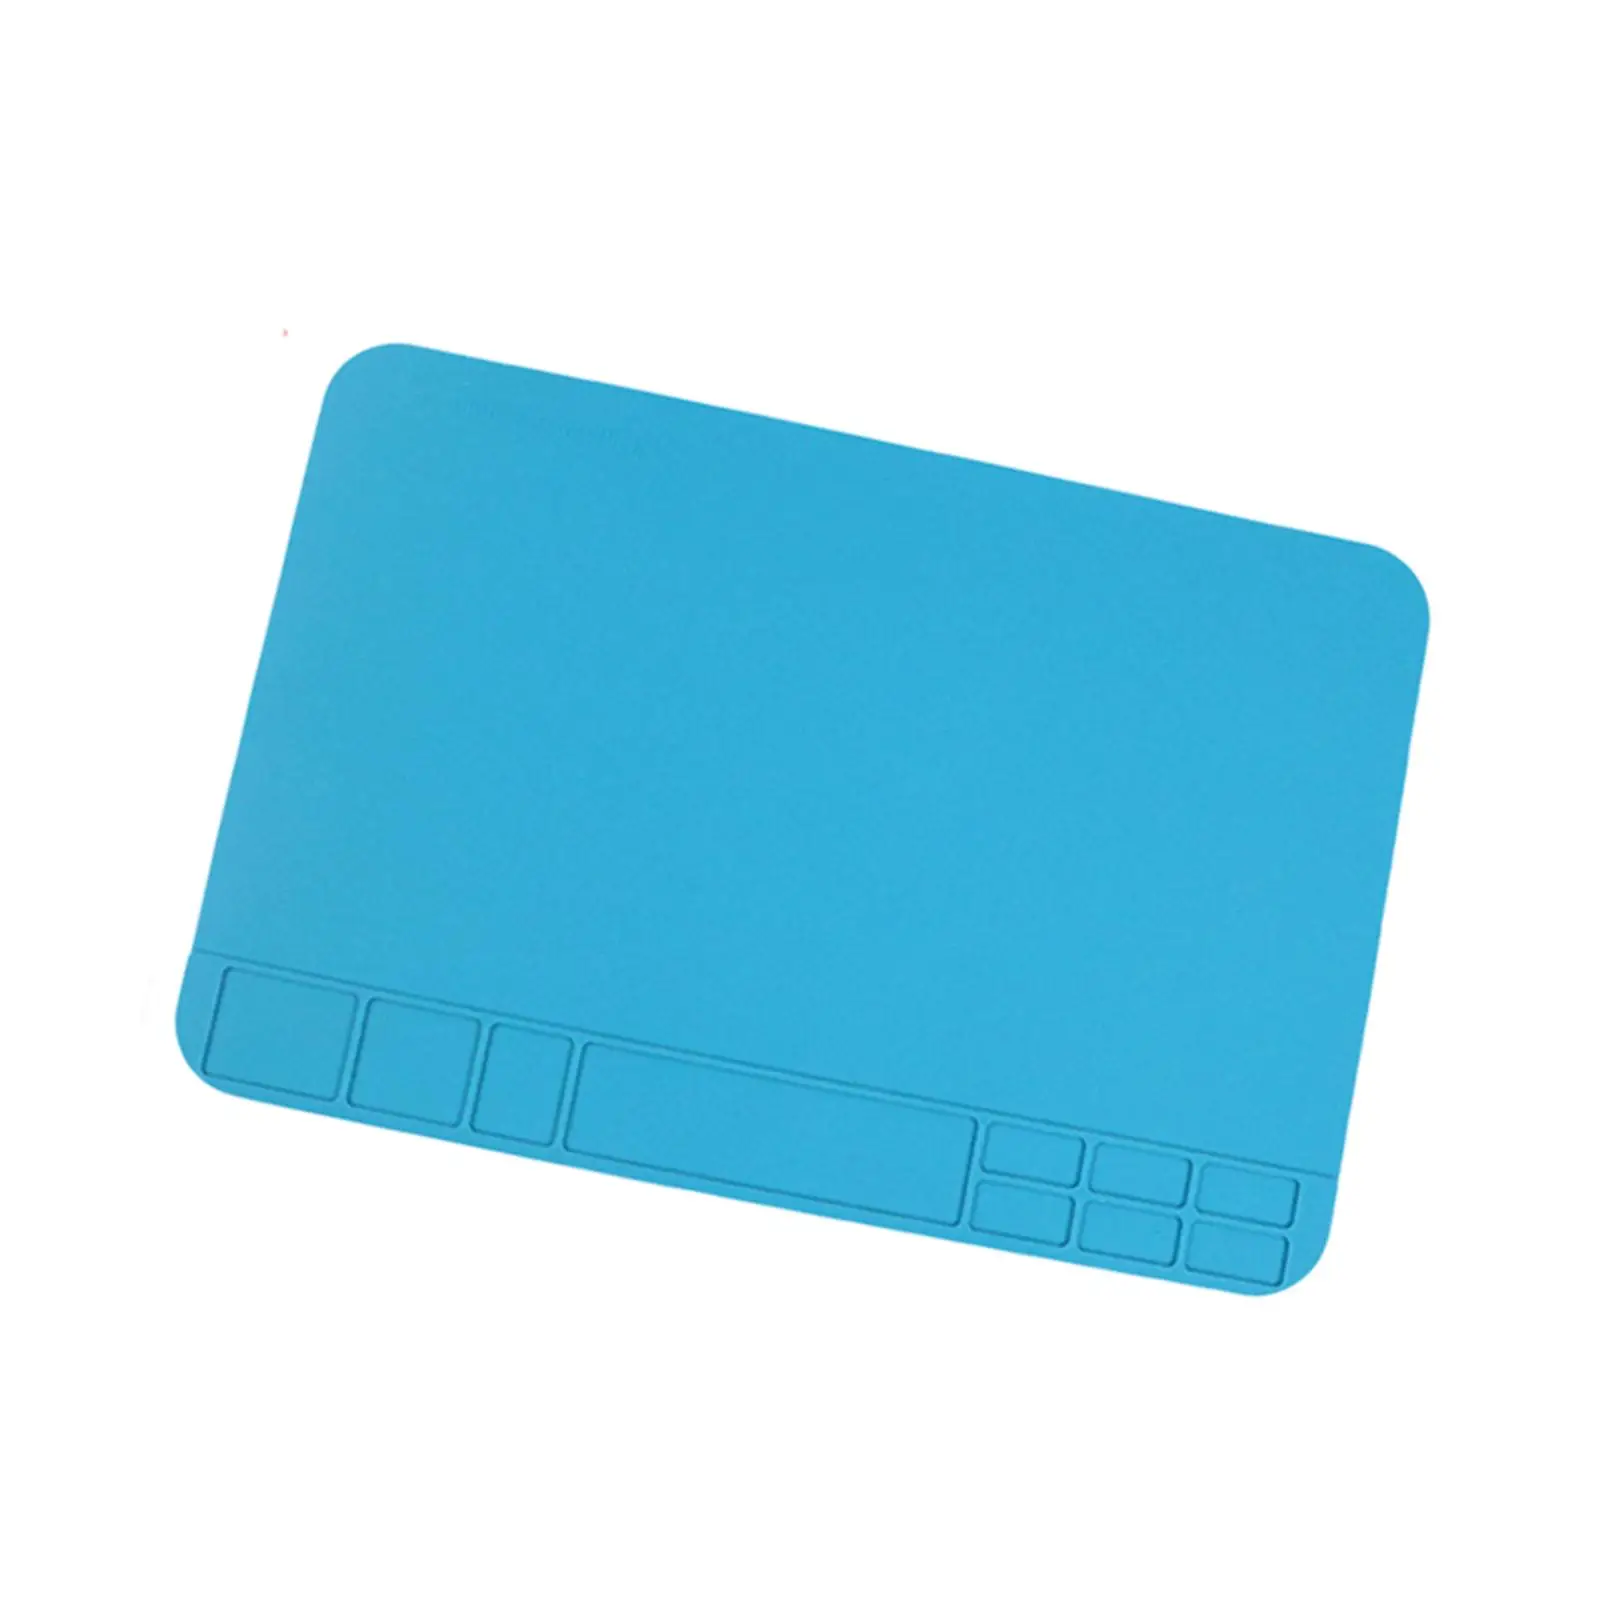 Heat Insulation Solder Mat Solder Pad Platform Repair Pad Thick Large Silicone Solder Work Station Mat for Laptop Watch Phone